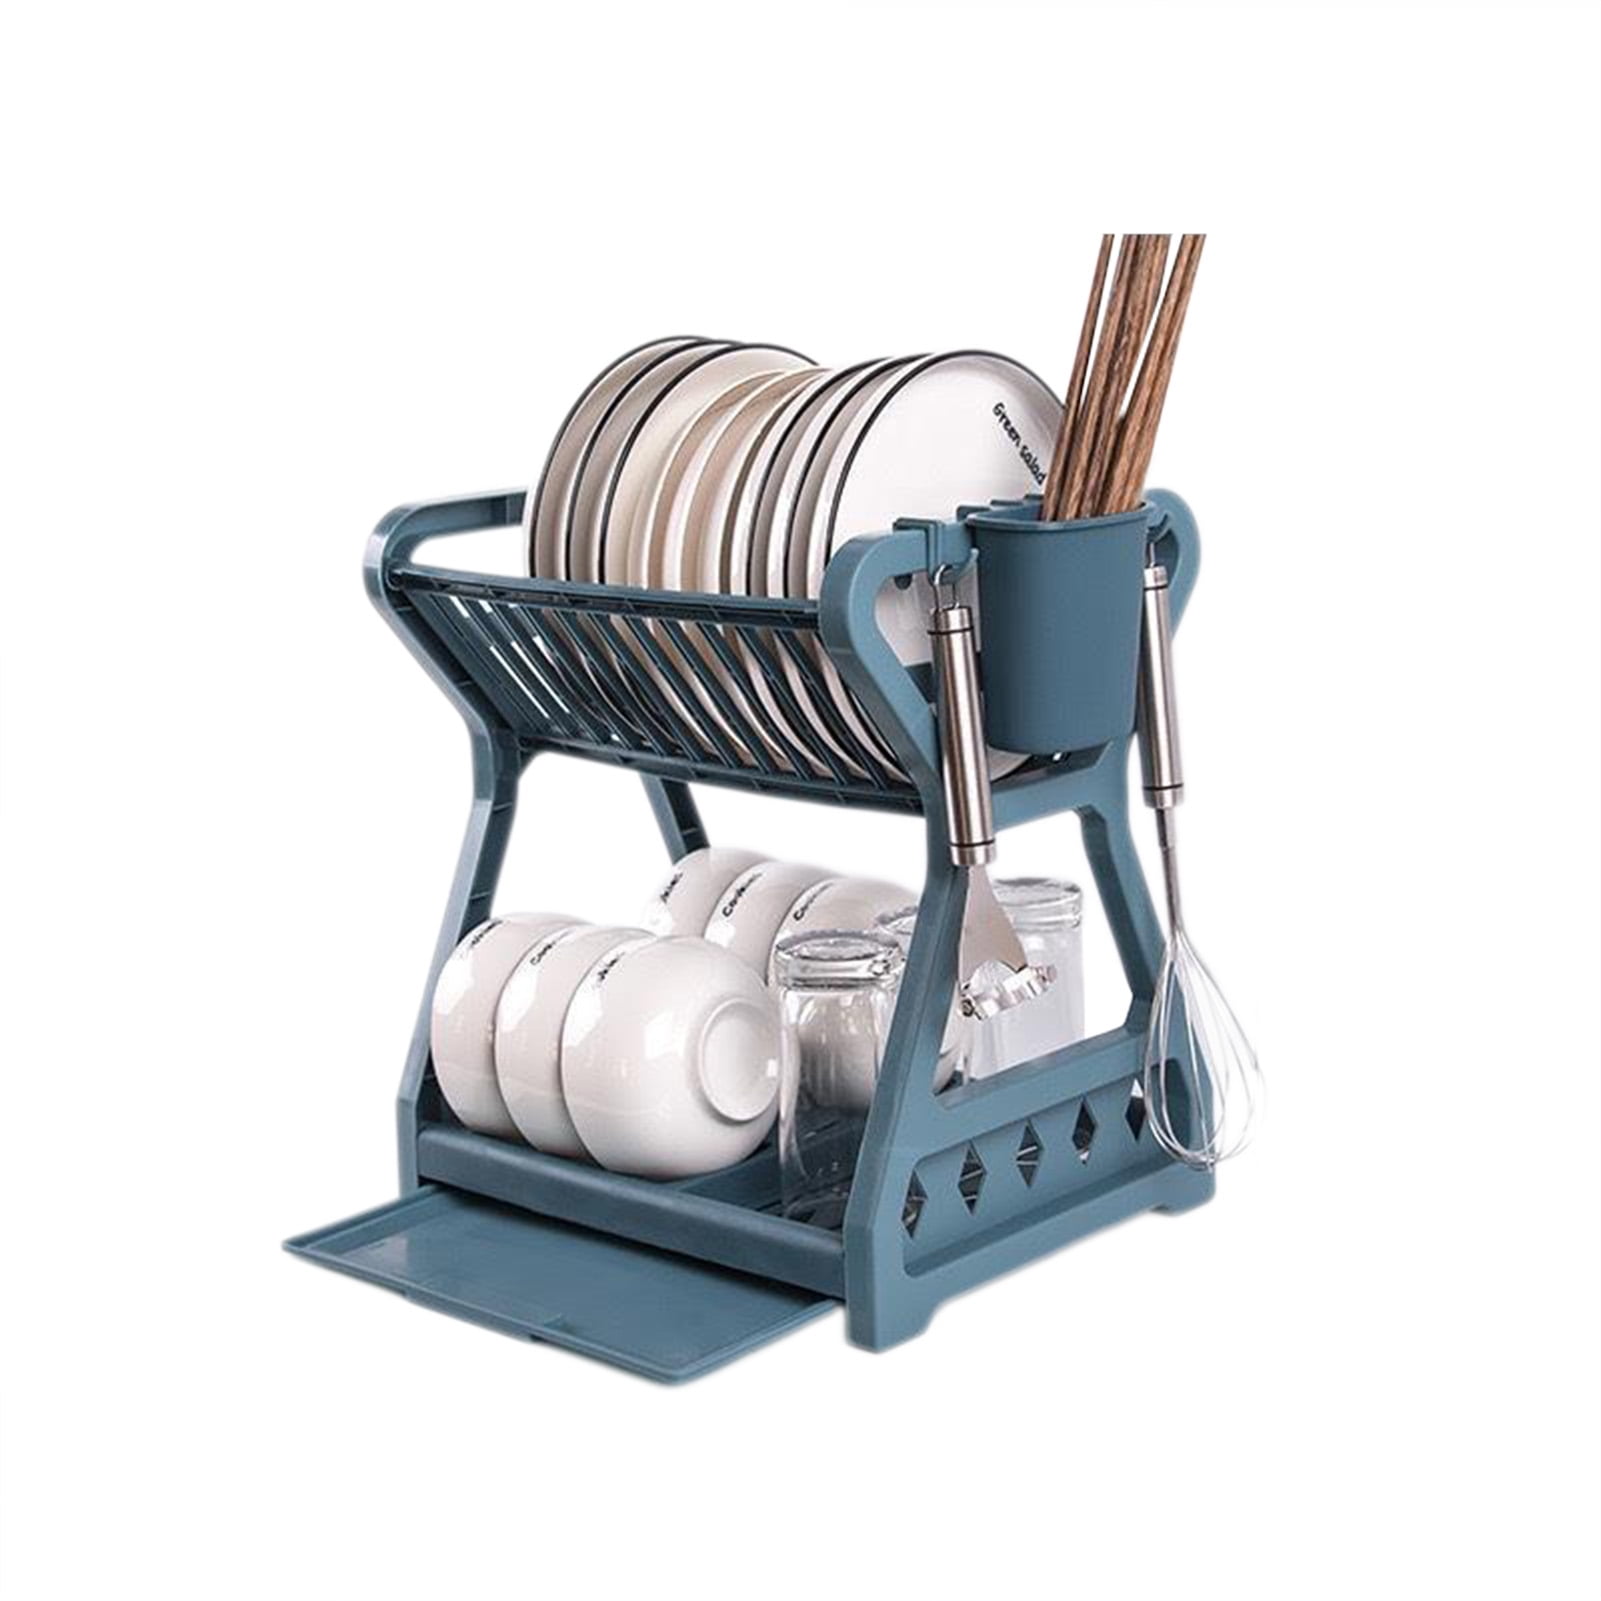 Dish Drying Rack - Large Size Multifunctional Drain Board Set, Durable  Tableware Drainer with Adjustable Rotating Drain, Model:DDR-001,by WEIKER.